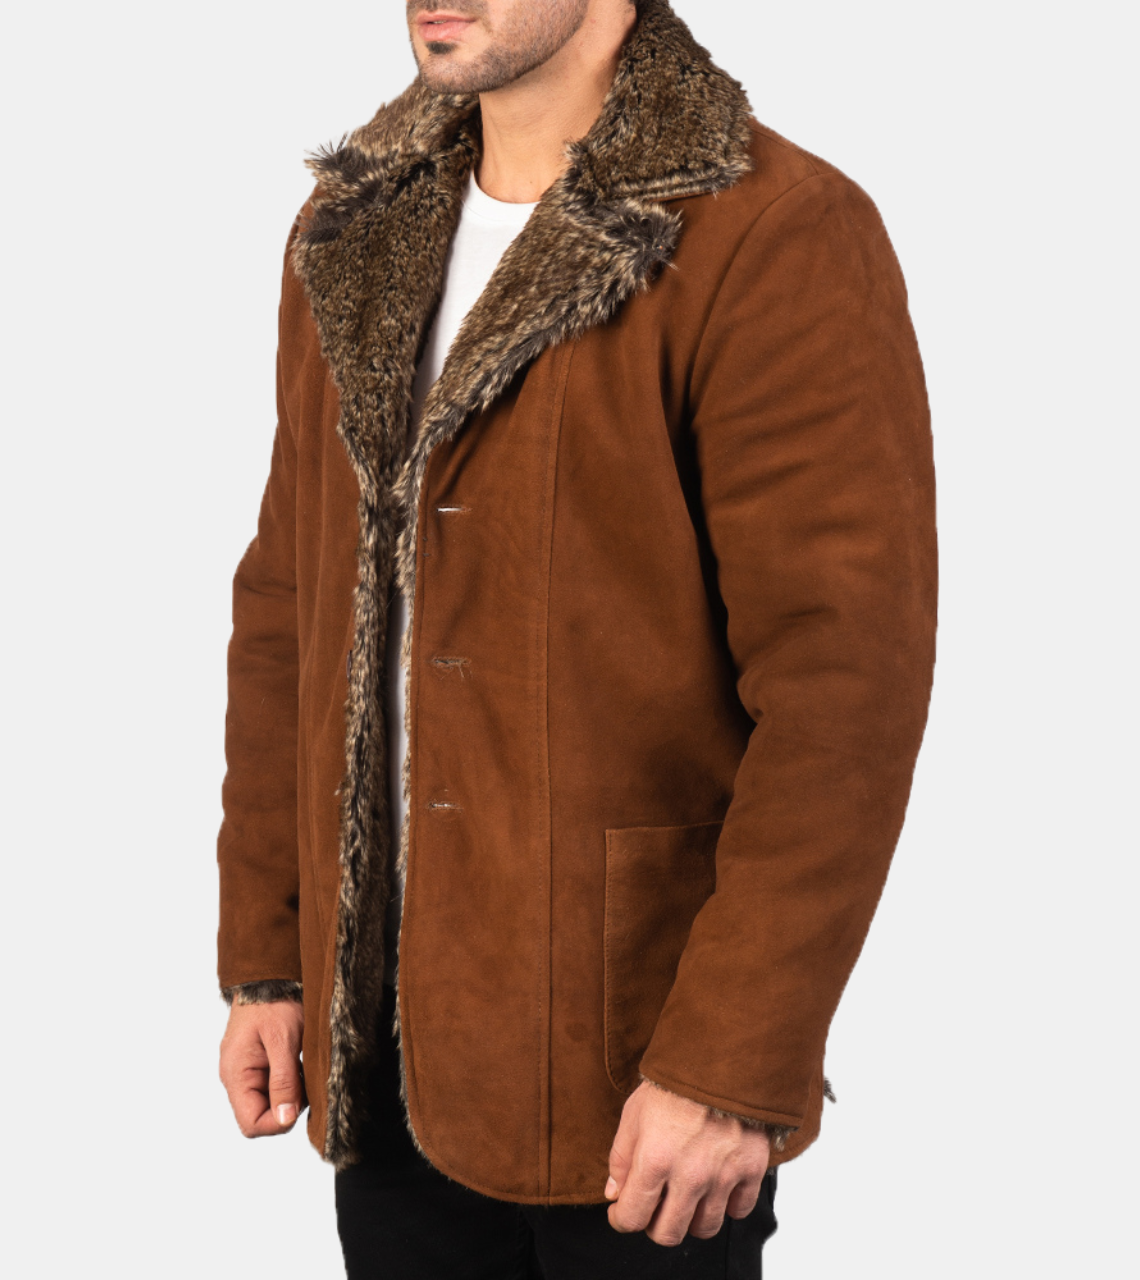  Men's Brown Shearling Suede Leather Jacket